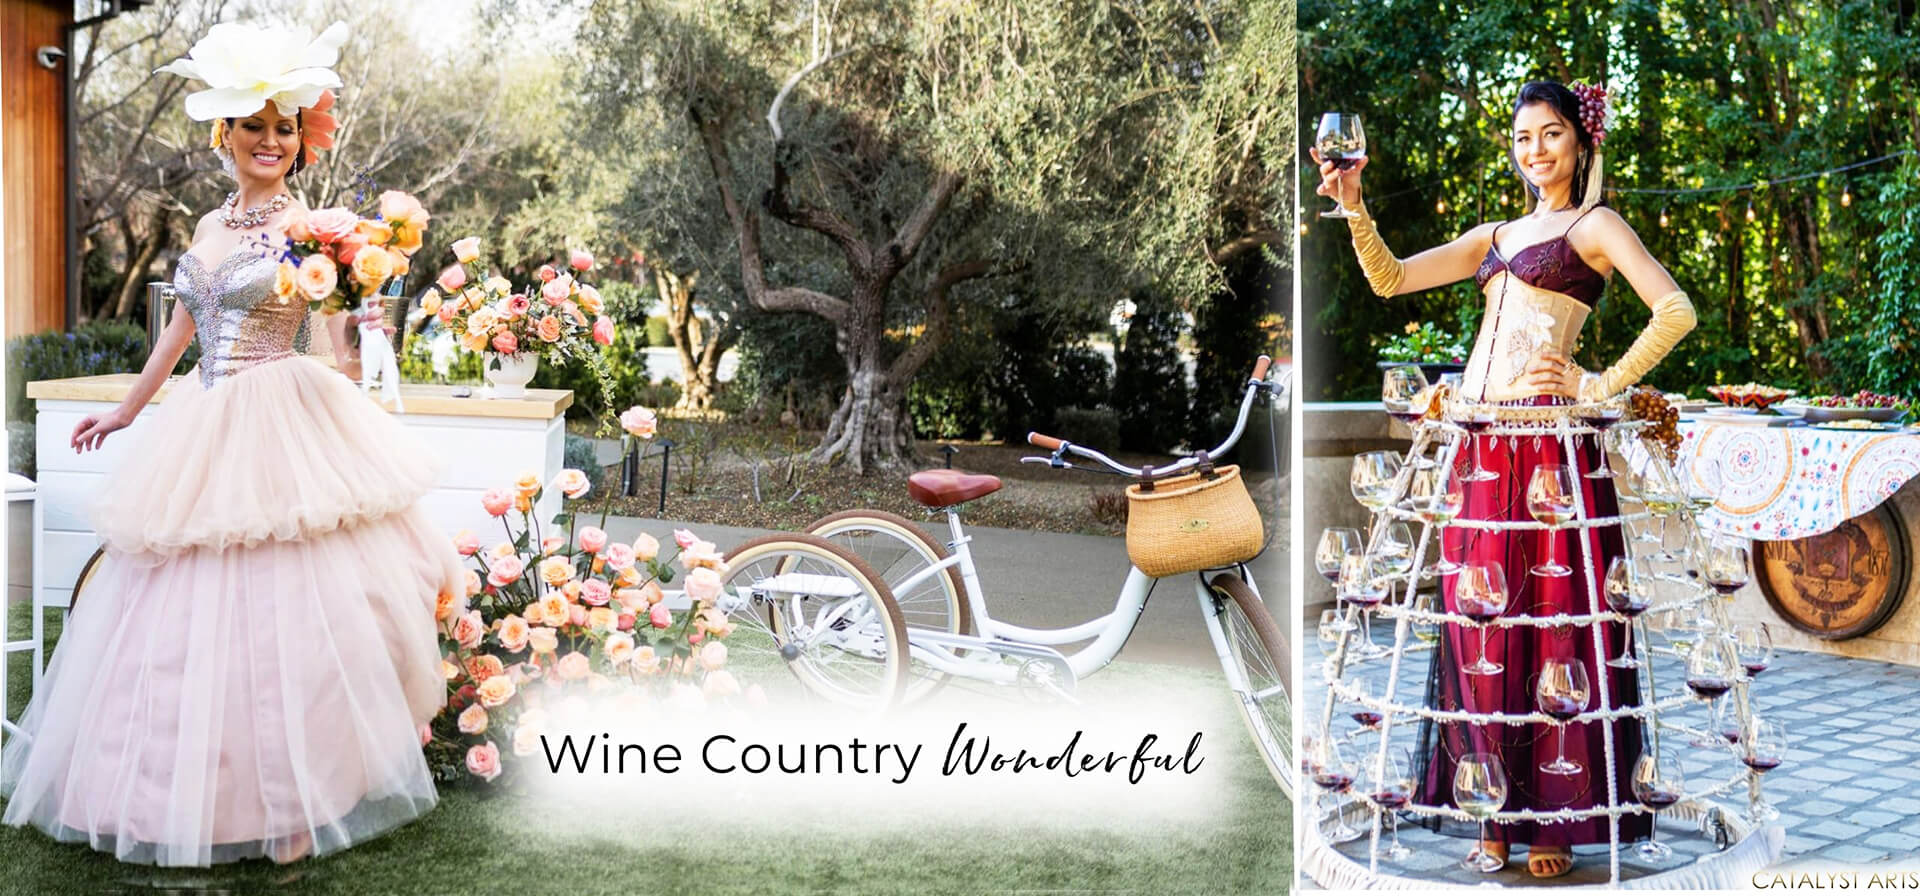 Wonderful Wine Country Wedding Entertainment & Experiences by Catalyst Arts. Photo on left Duy Hoy 